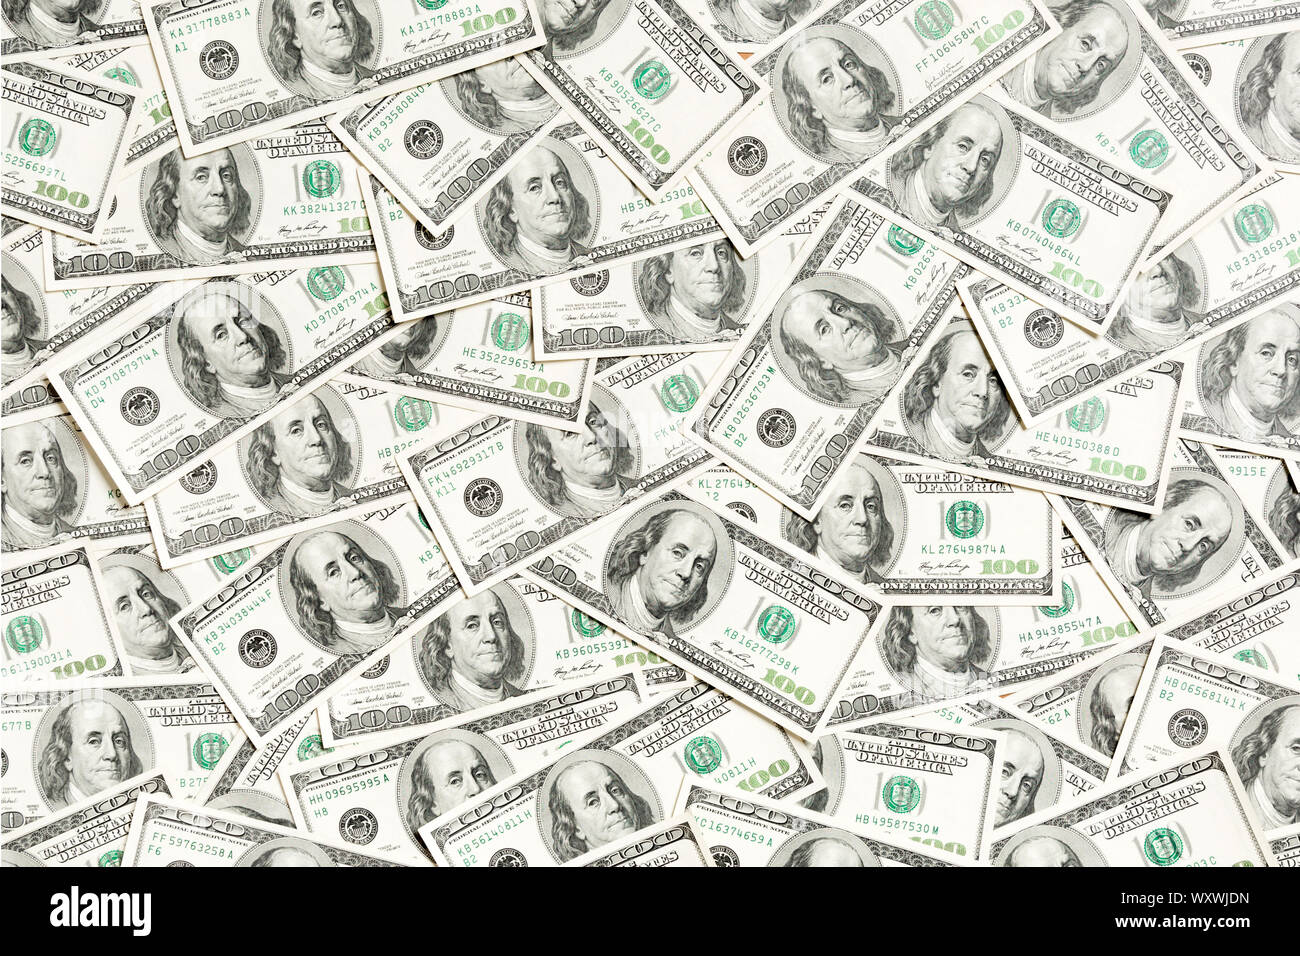 Top View Of American Money Background Pile Of Dollar Cash Paper Banknotes Concept Stock Photo Alamy